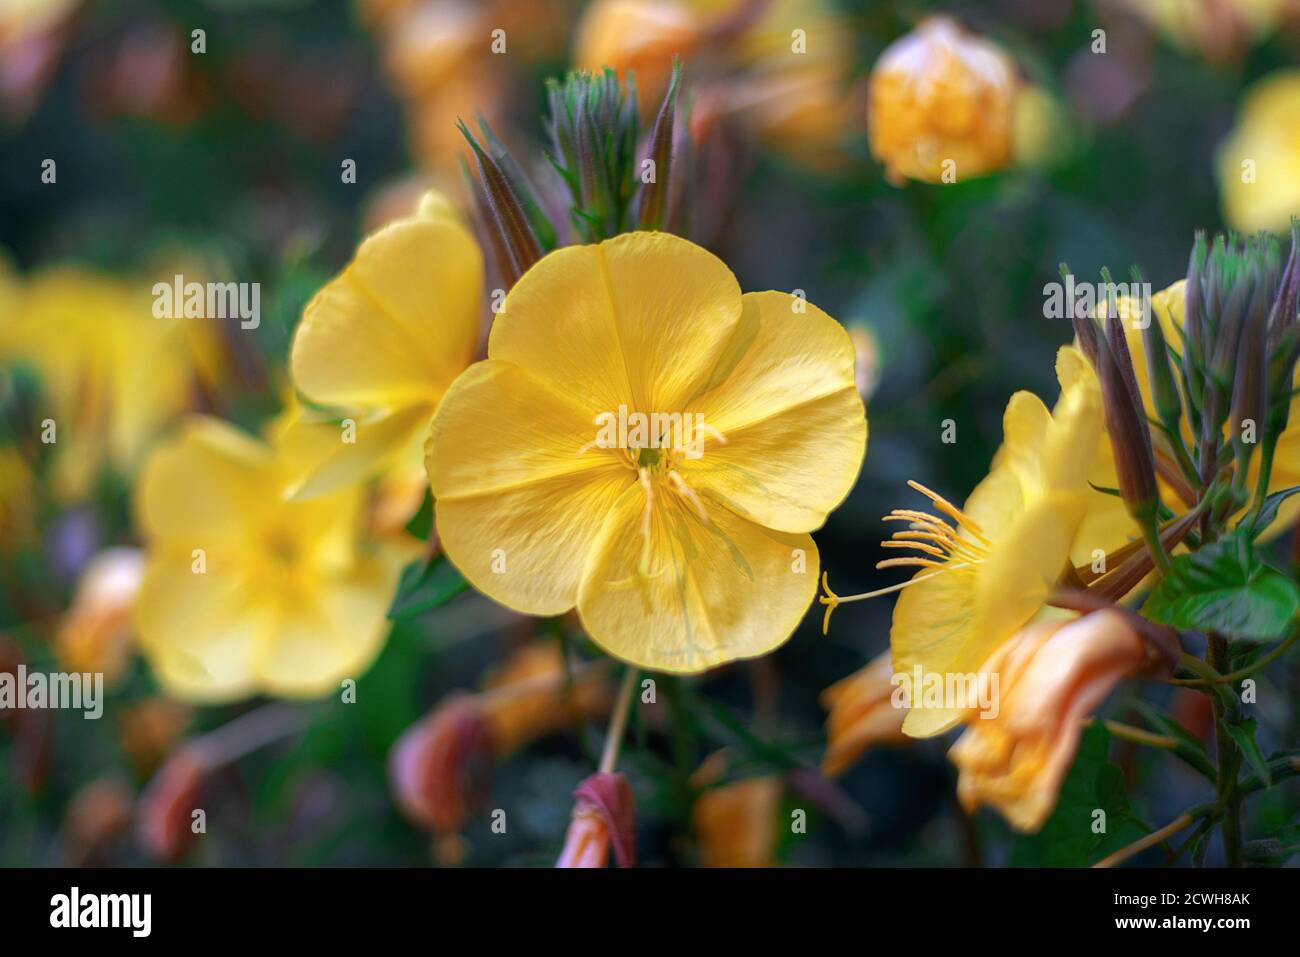 yellow evening primrose on the bushes in the garden background image Stock Photo